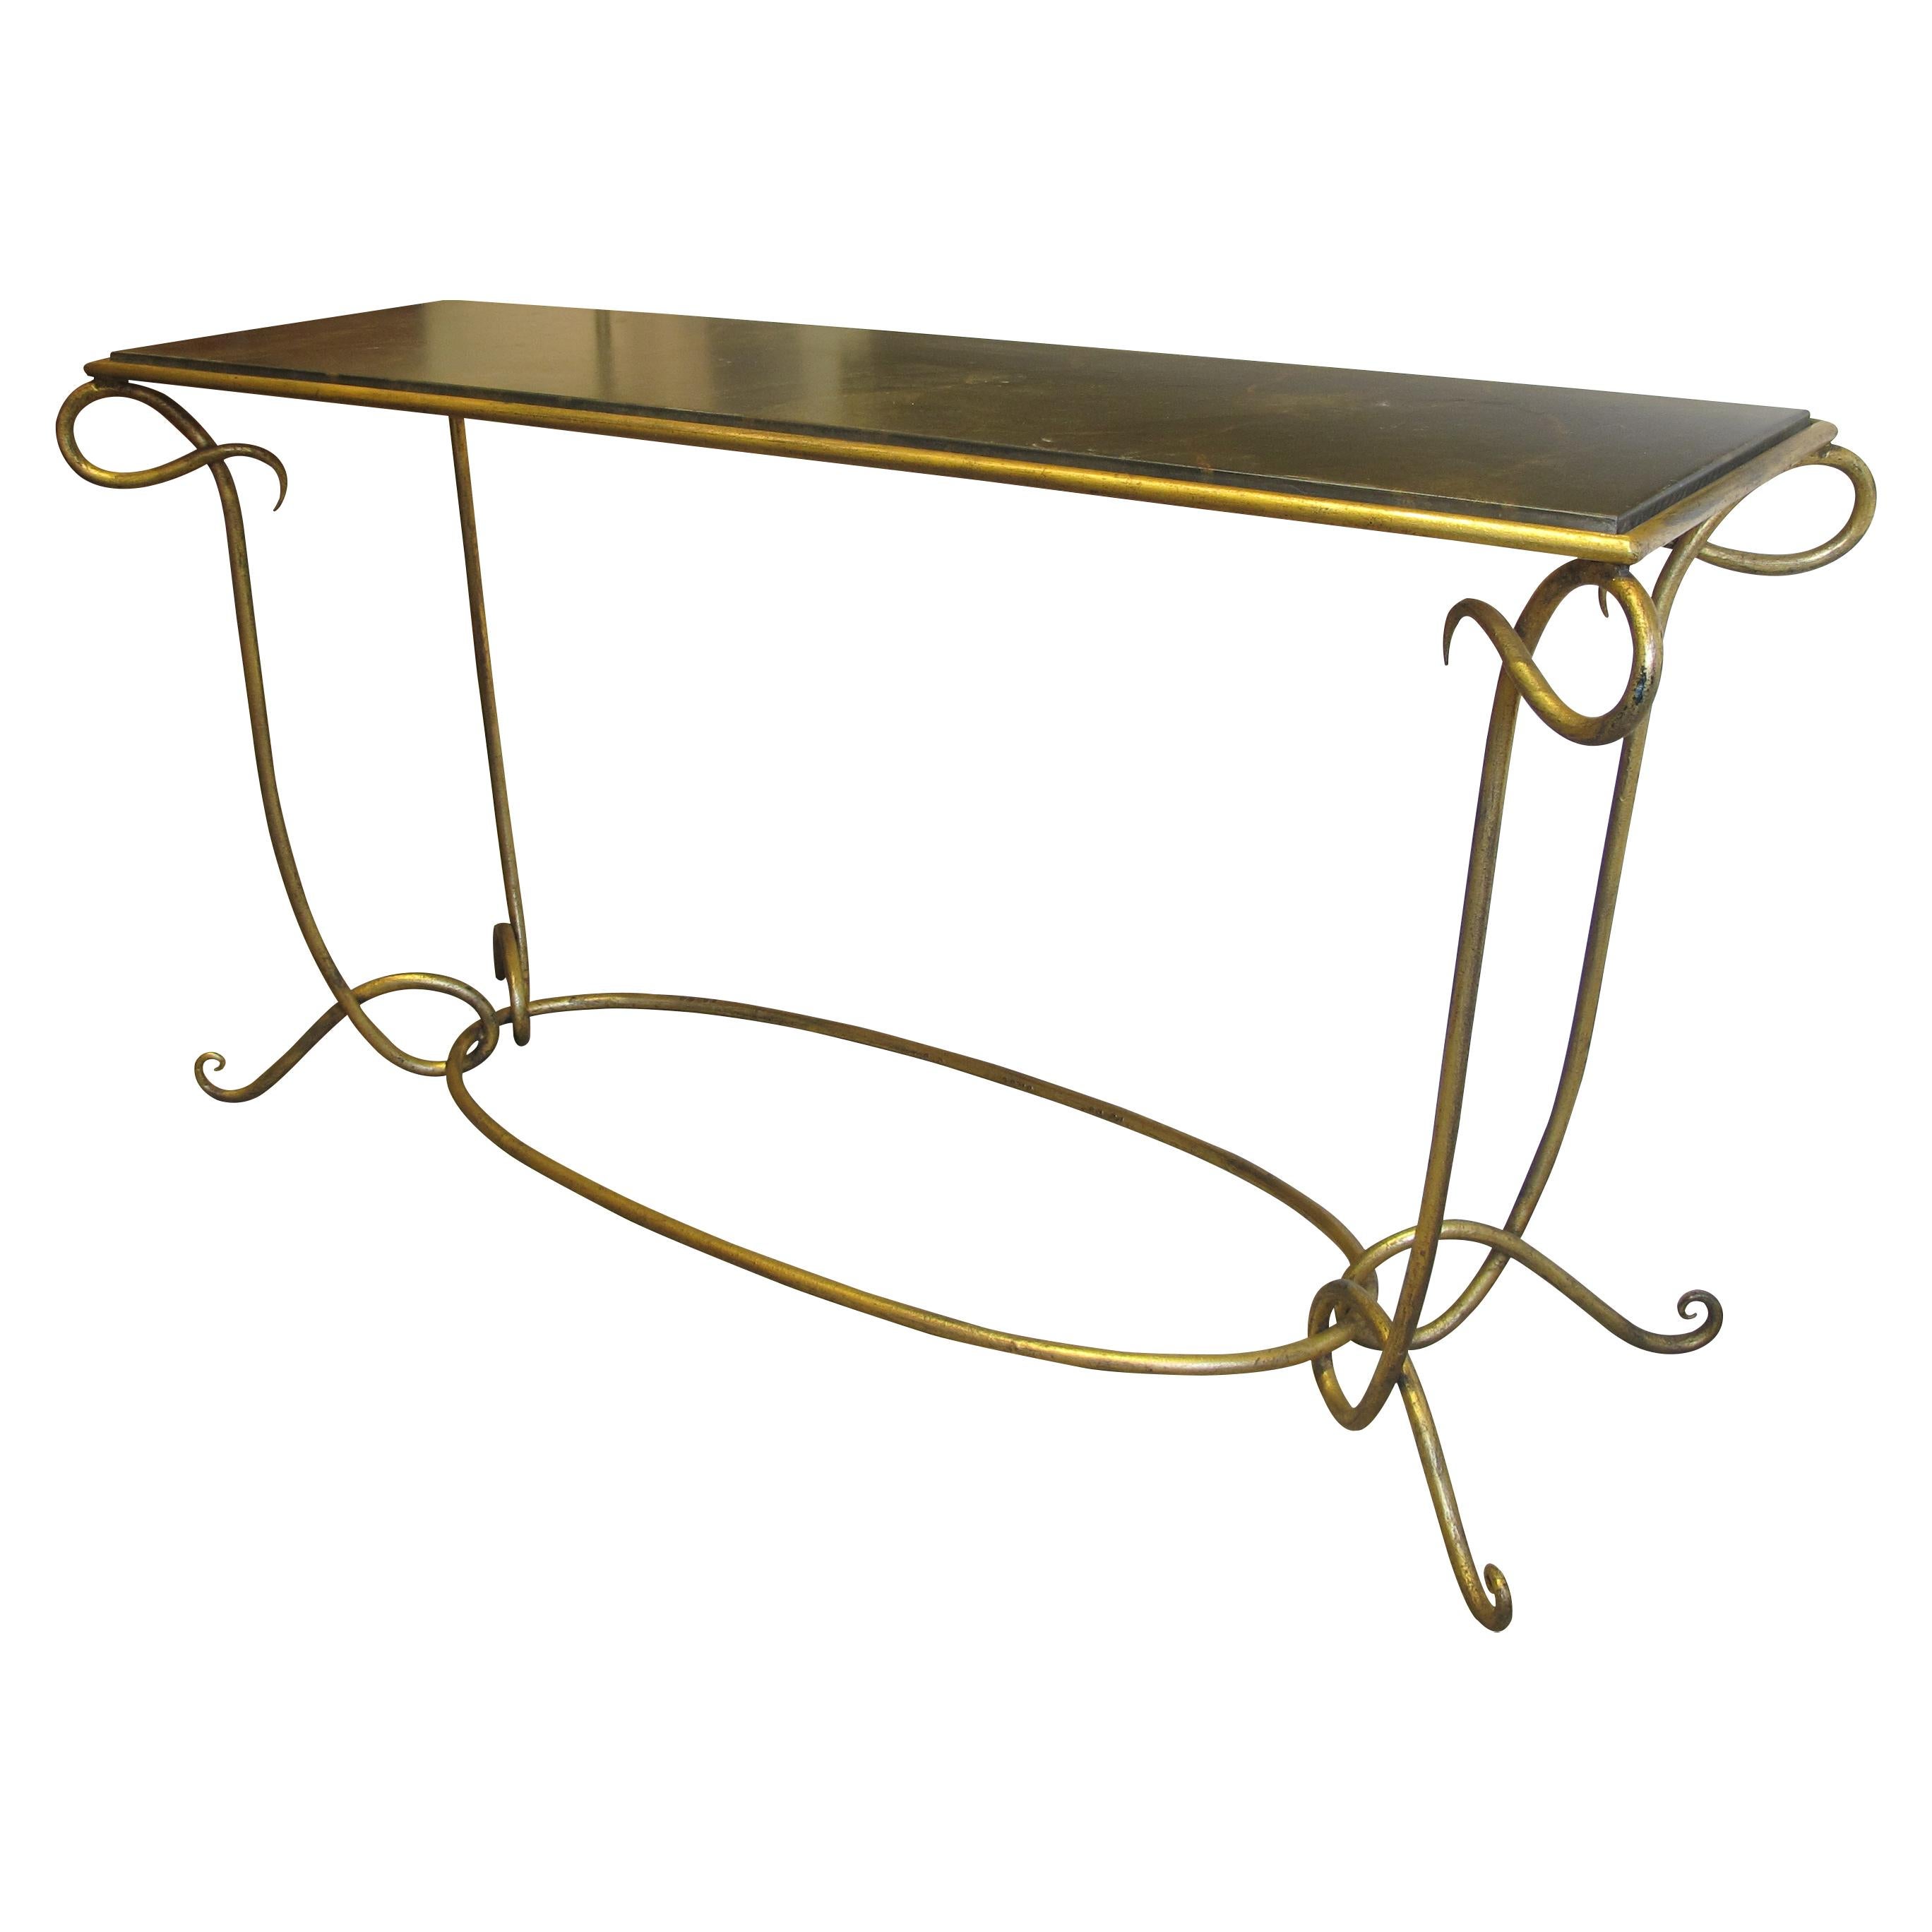 Mid-Century Modern 1950s Large French Console Table with a Gilt Iron Frame - style of René Drouet